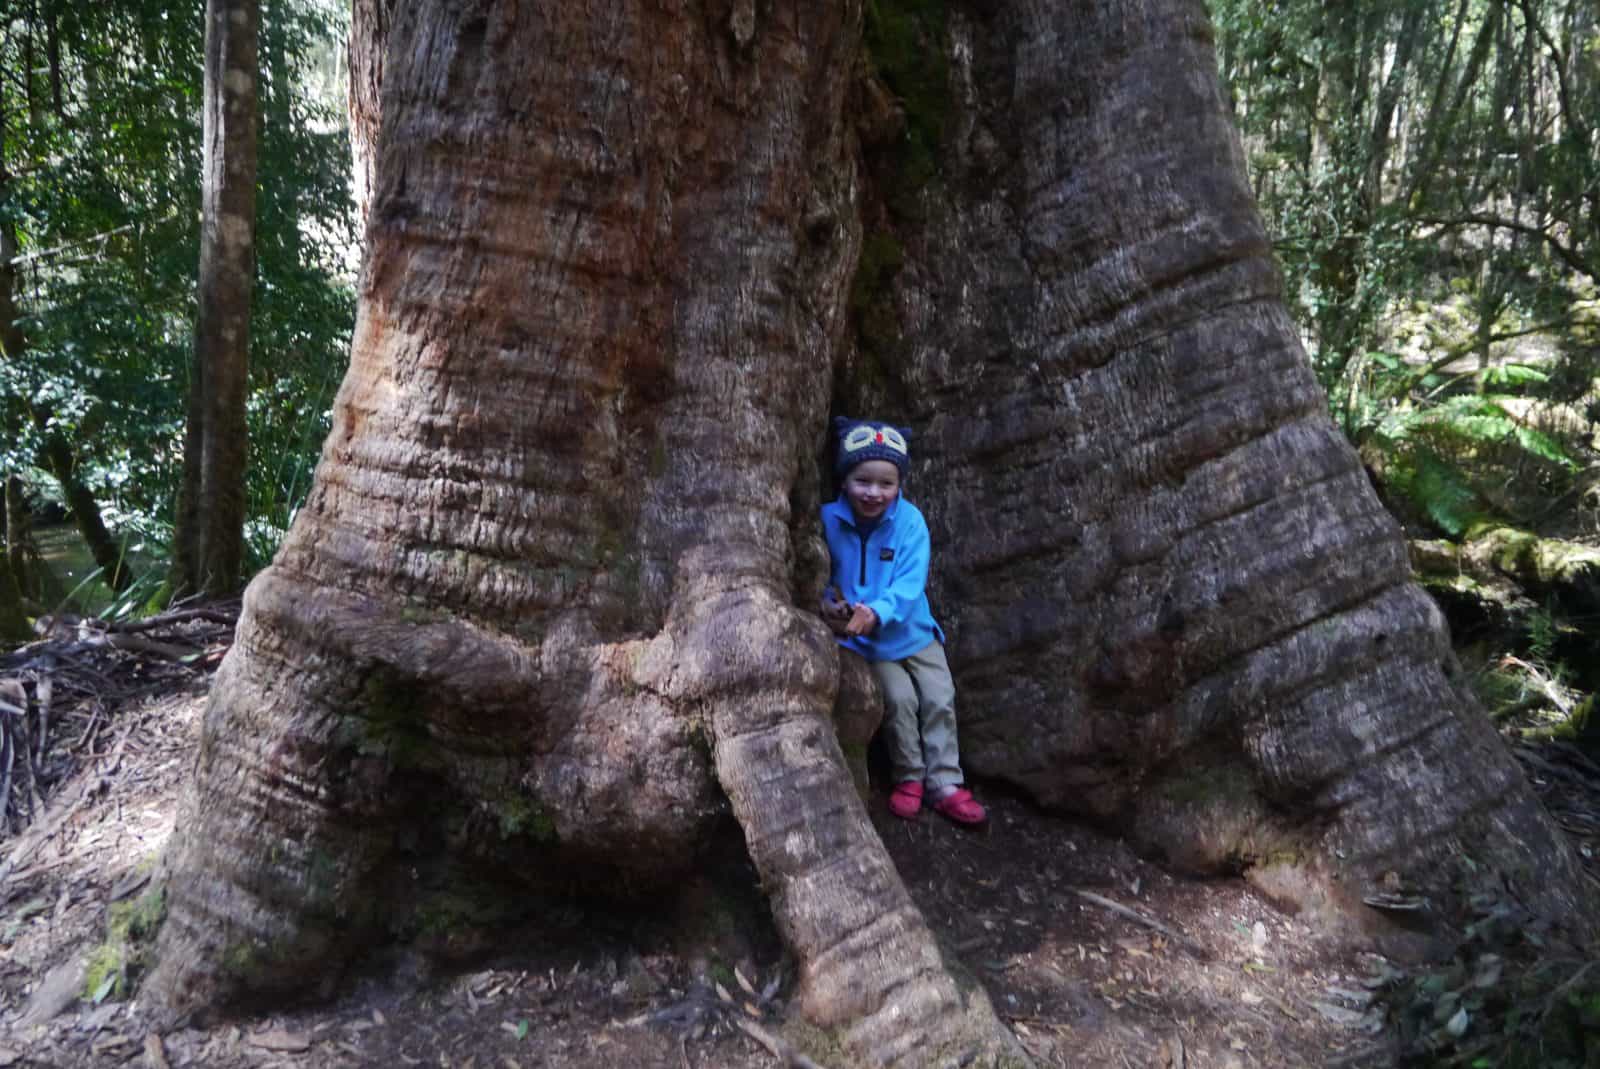 A small boy smiles broadly while hugging a giant tree